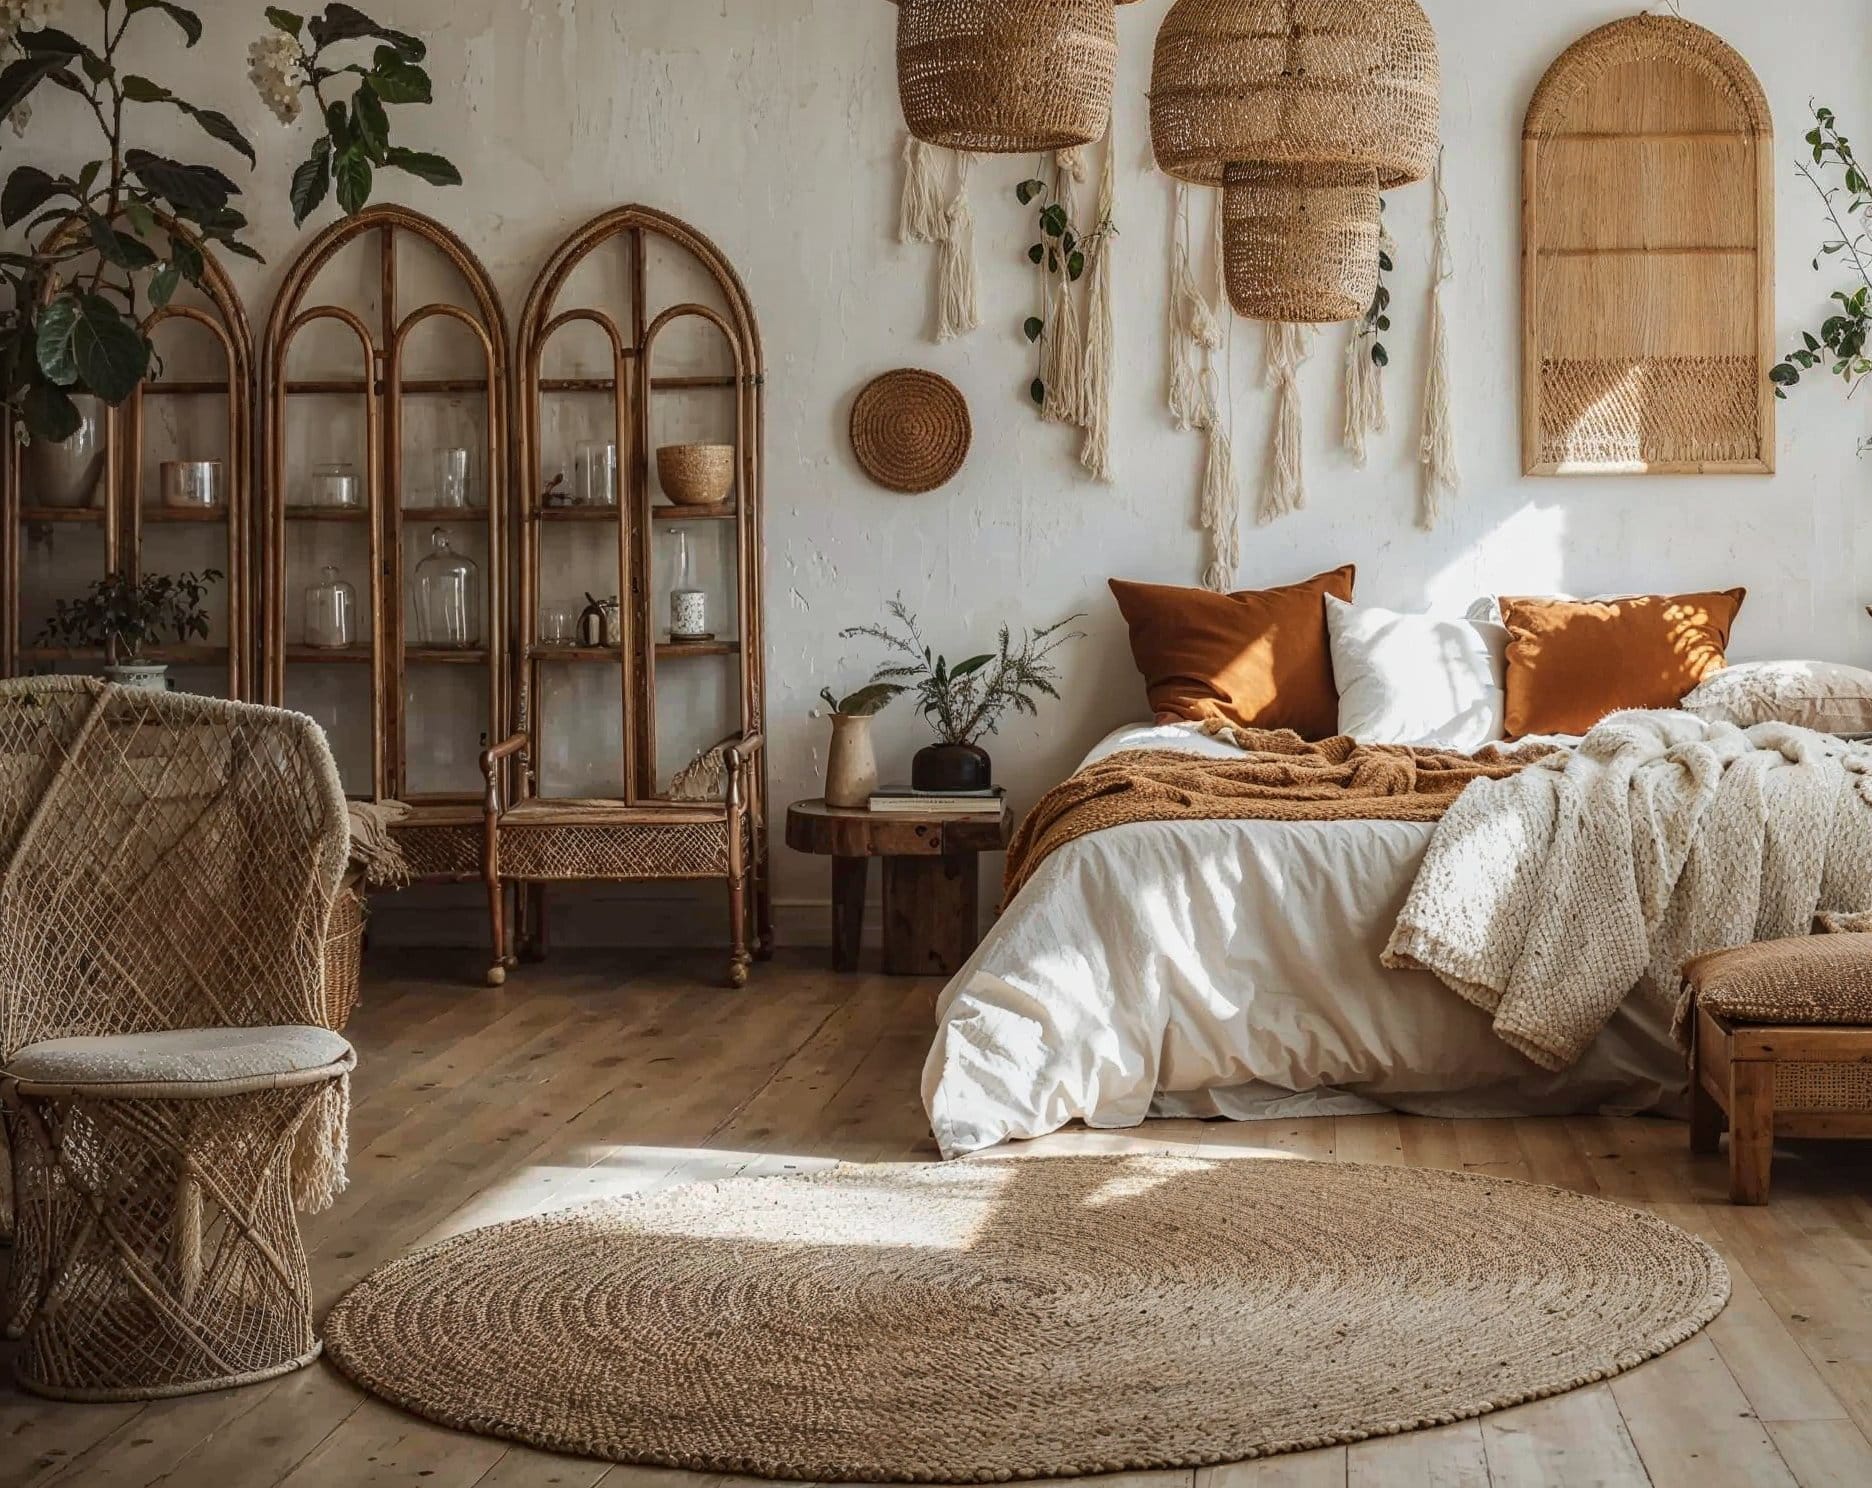 17 Modern Rustic Bedroom Ideas for Comfort & Style